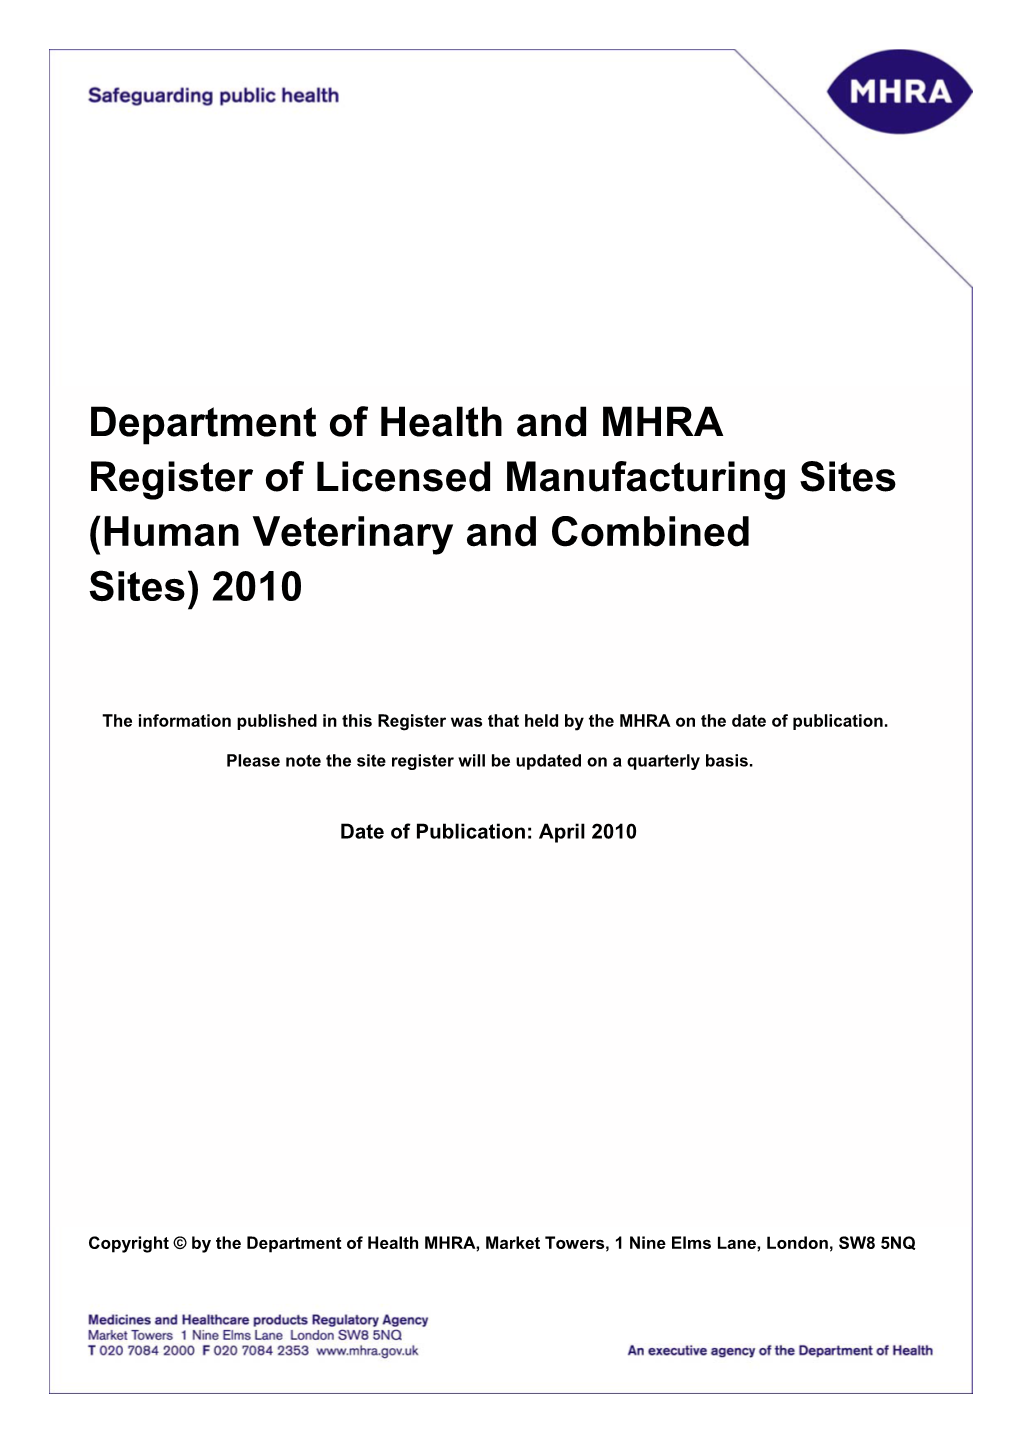 Department of Health and MHRA Register of Licensed Manufacturing Sites (Human Veterinary and Combined Sites) 2010